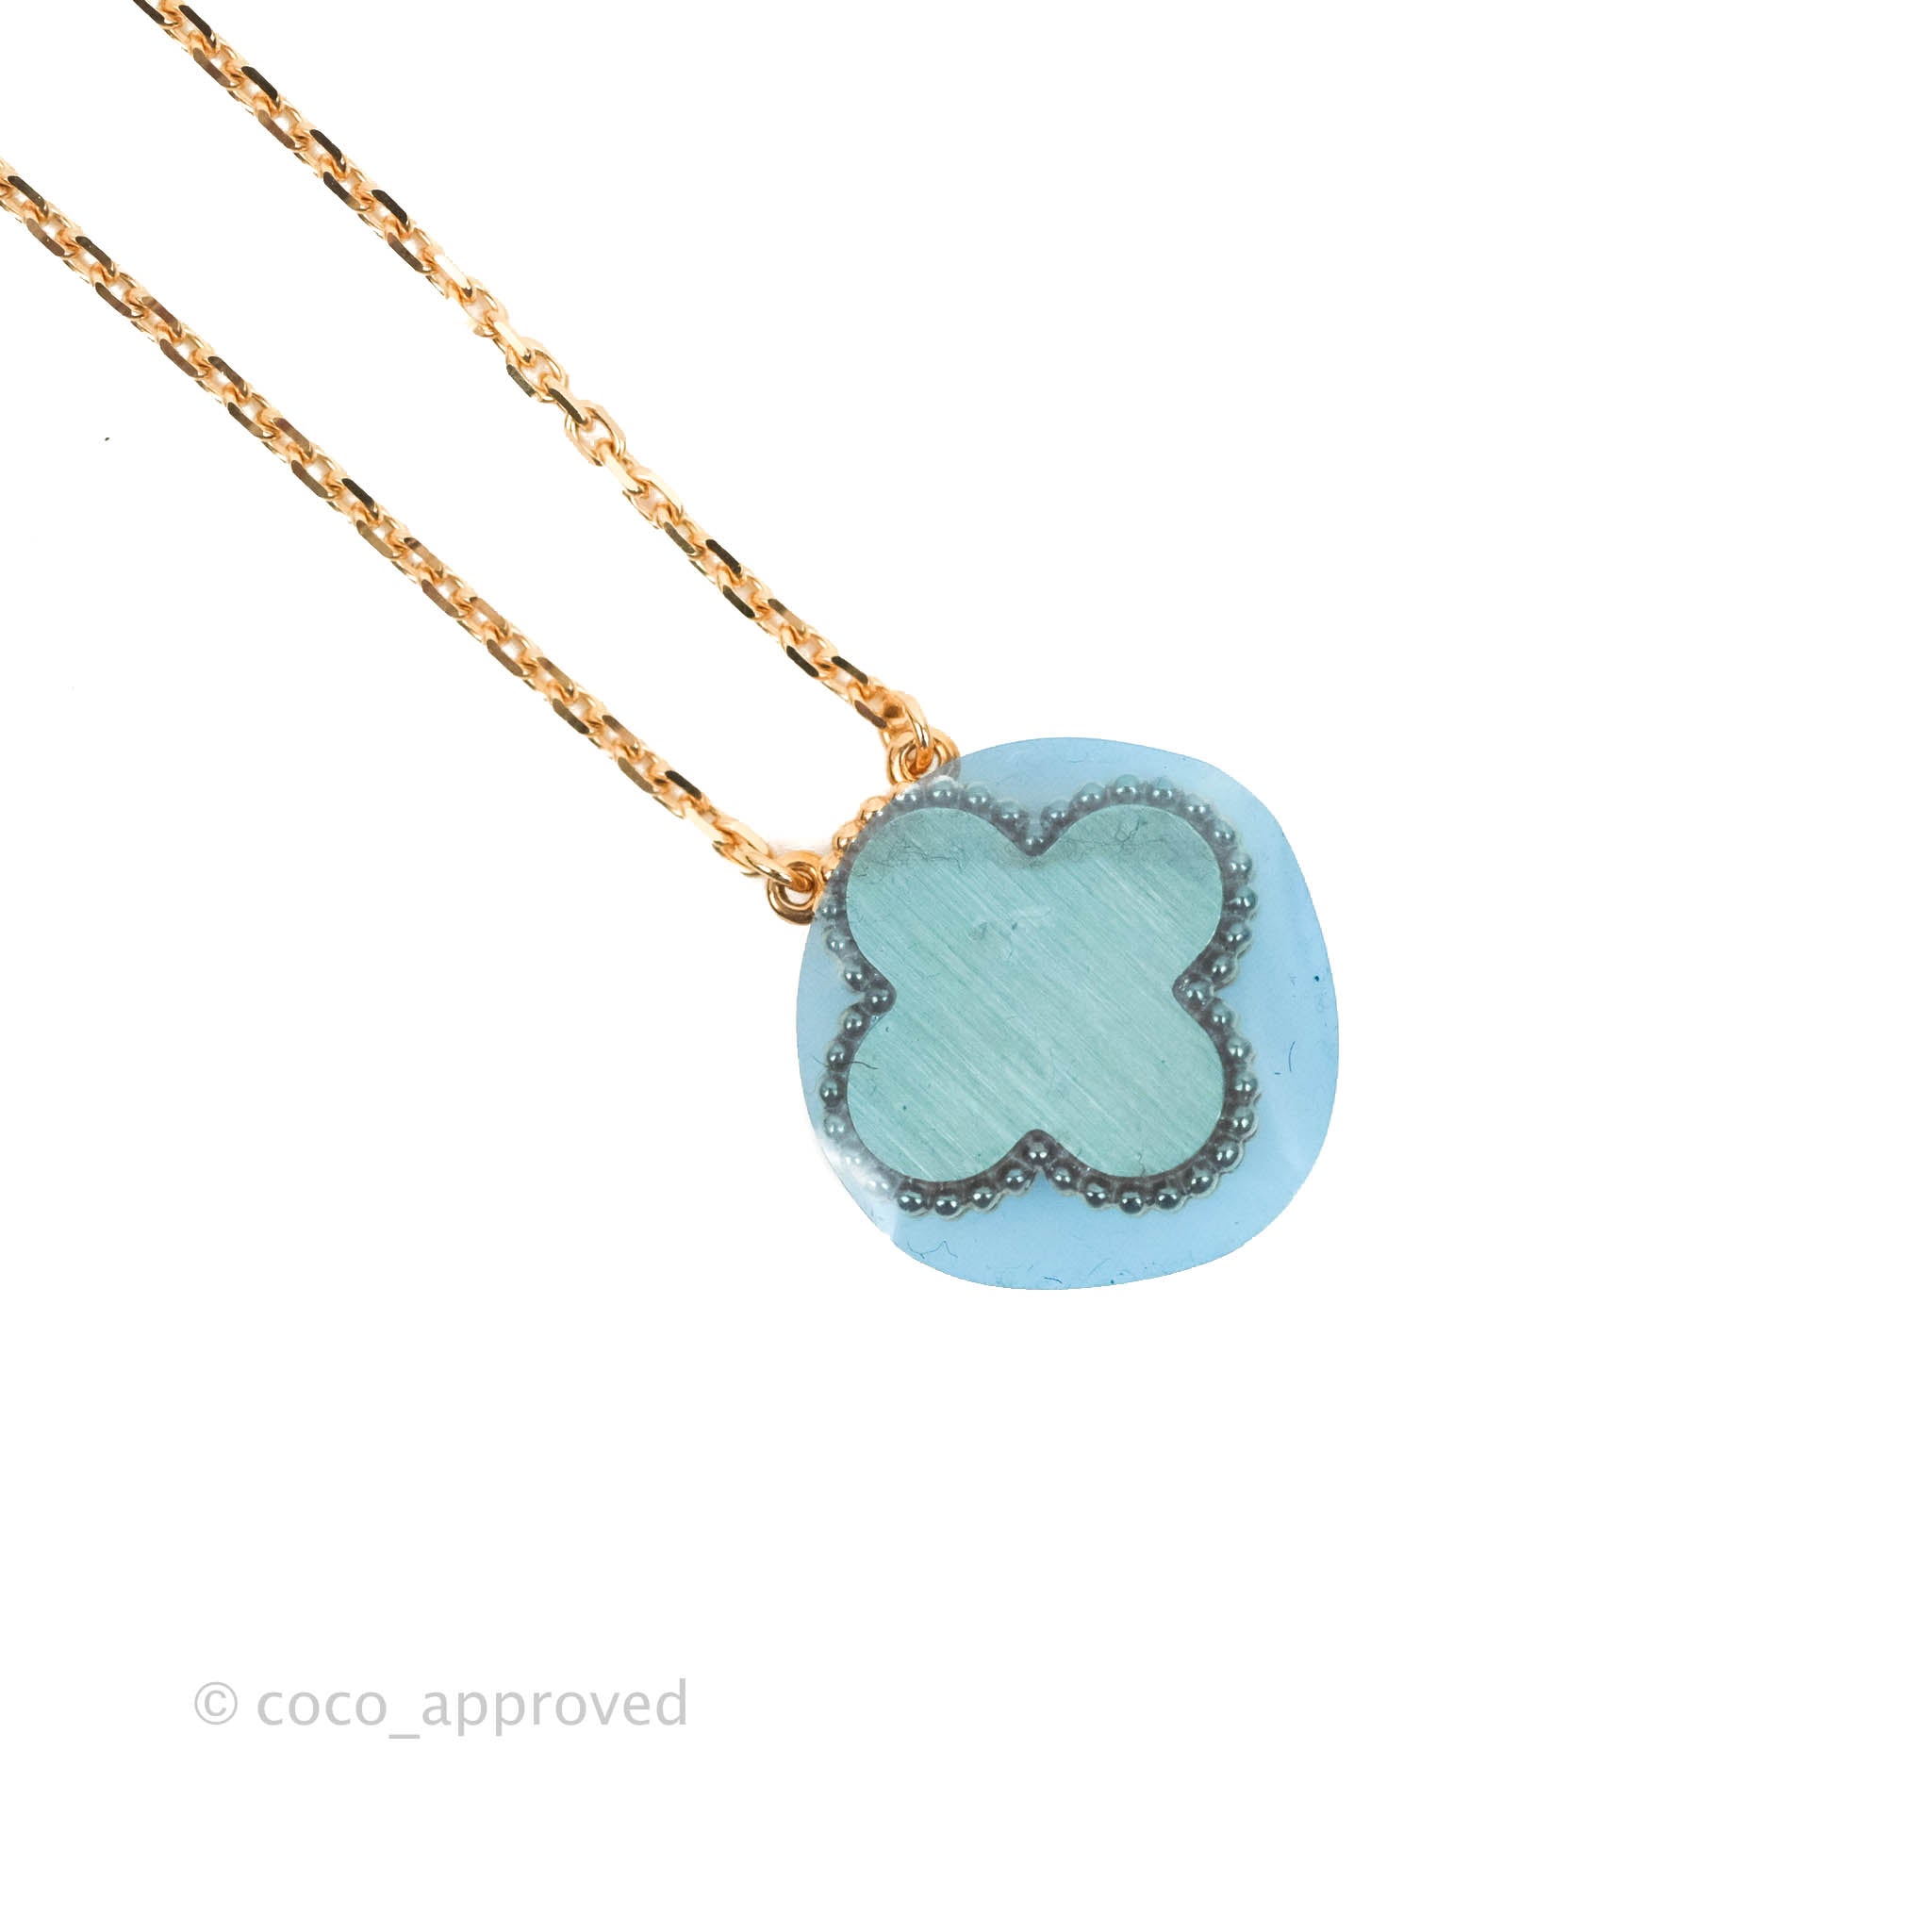 NO RESERVE | VAN CLEEF & ARPELS SUITE OF TURQUOISE 'PERLÉE COULEURS'  JEWELRY, | Christie's